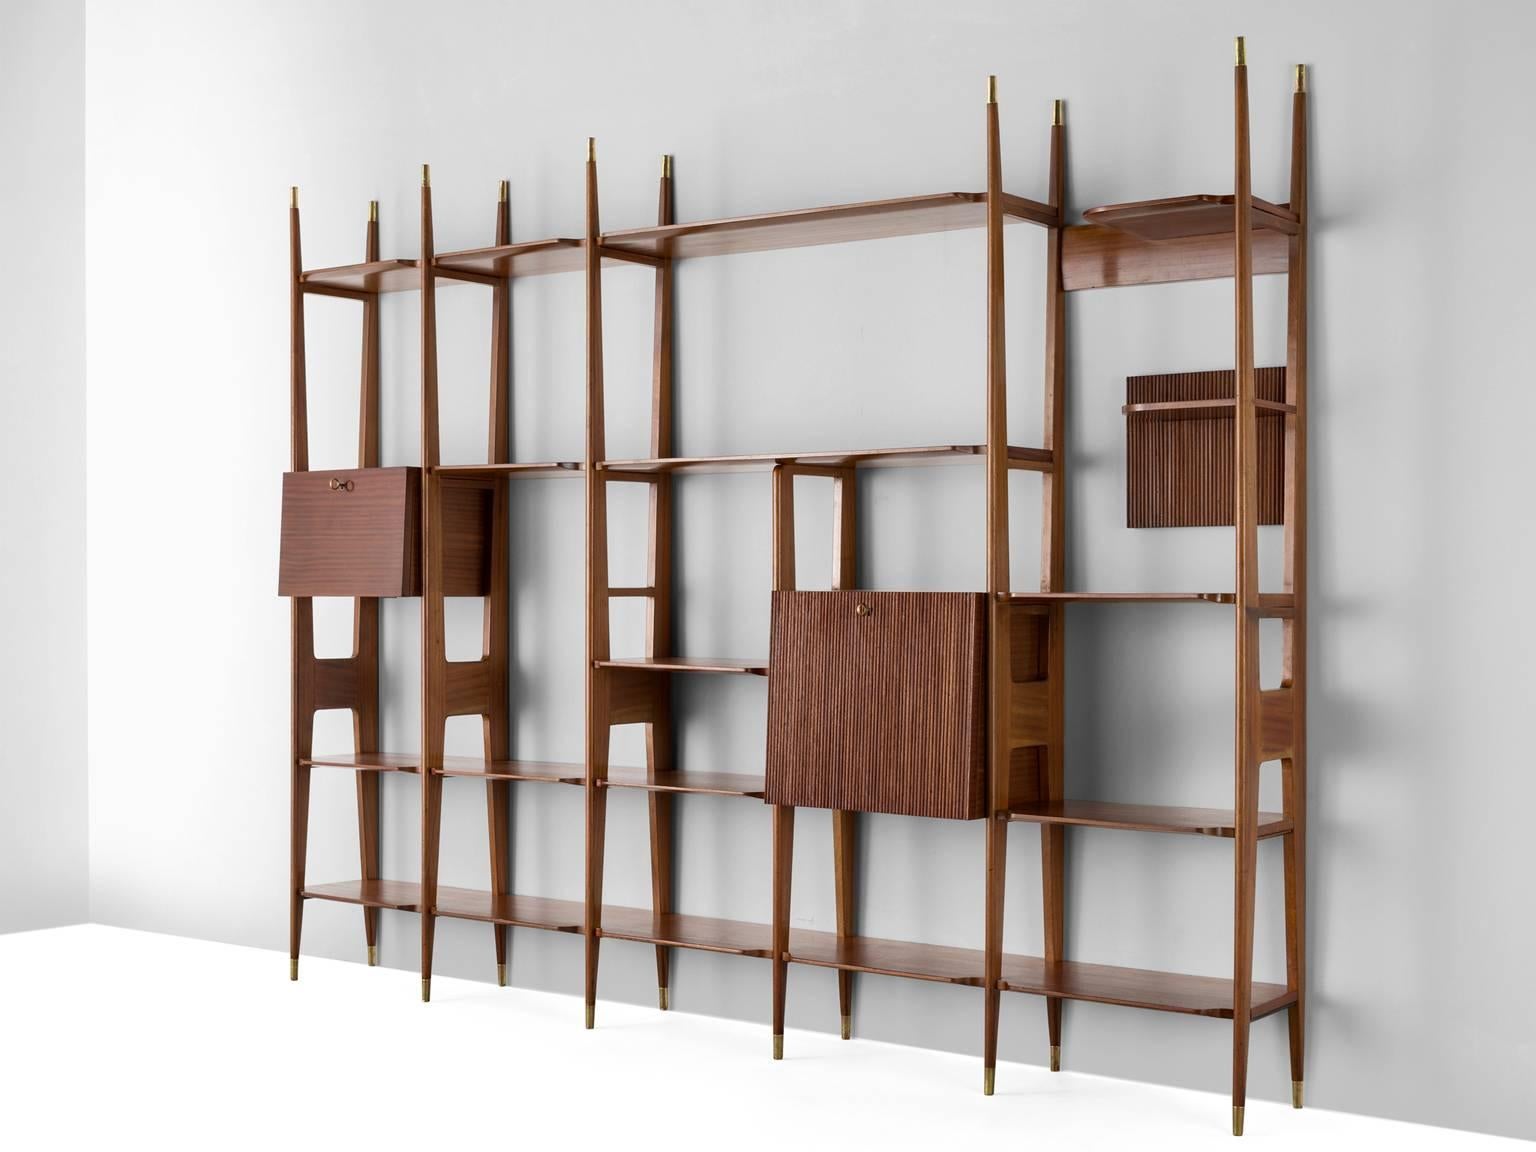 Cabinet, in brass and walnut, Italy, 1950s. 

This delicate Italian wall unit is executed the style of Ico Parisi, Paolo Buffa and Vittorio Dassi on subtle tapered legs that are identical to those at the top. Especially the brass feet and tops